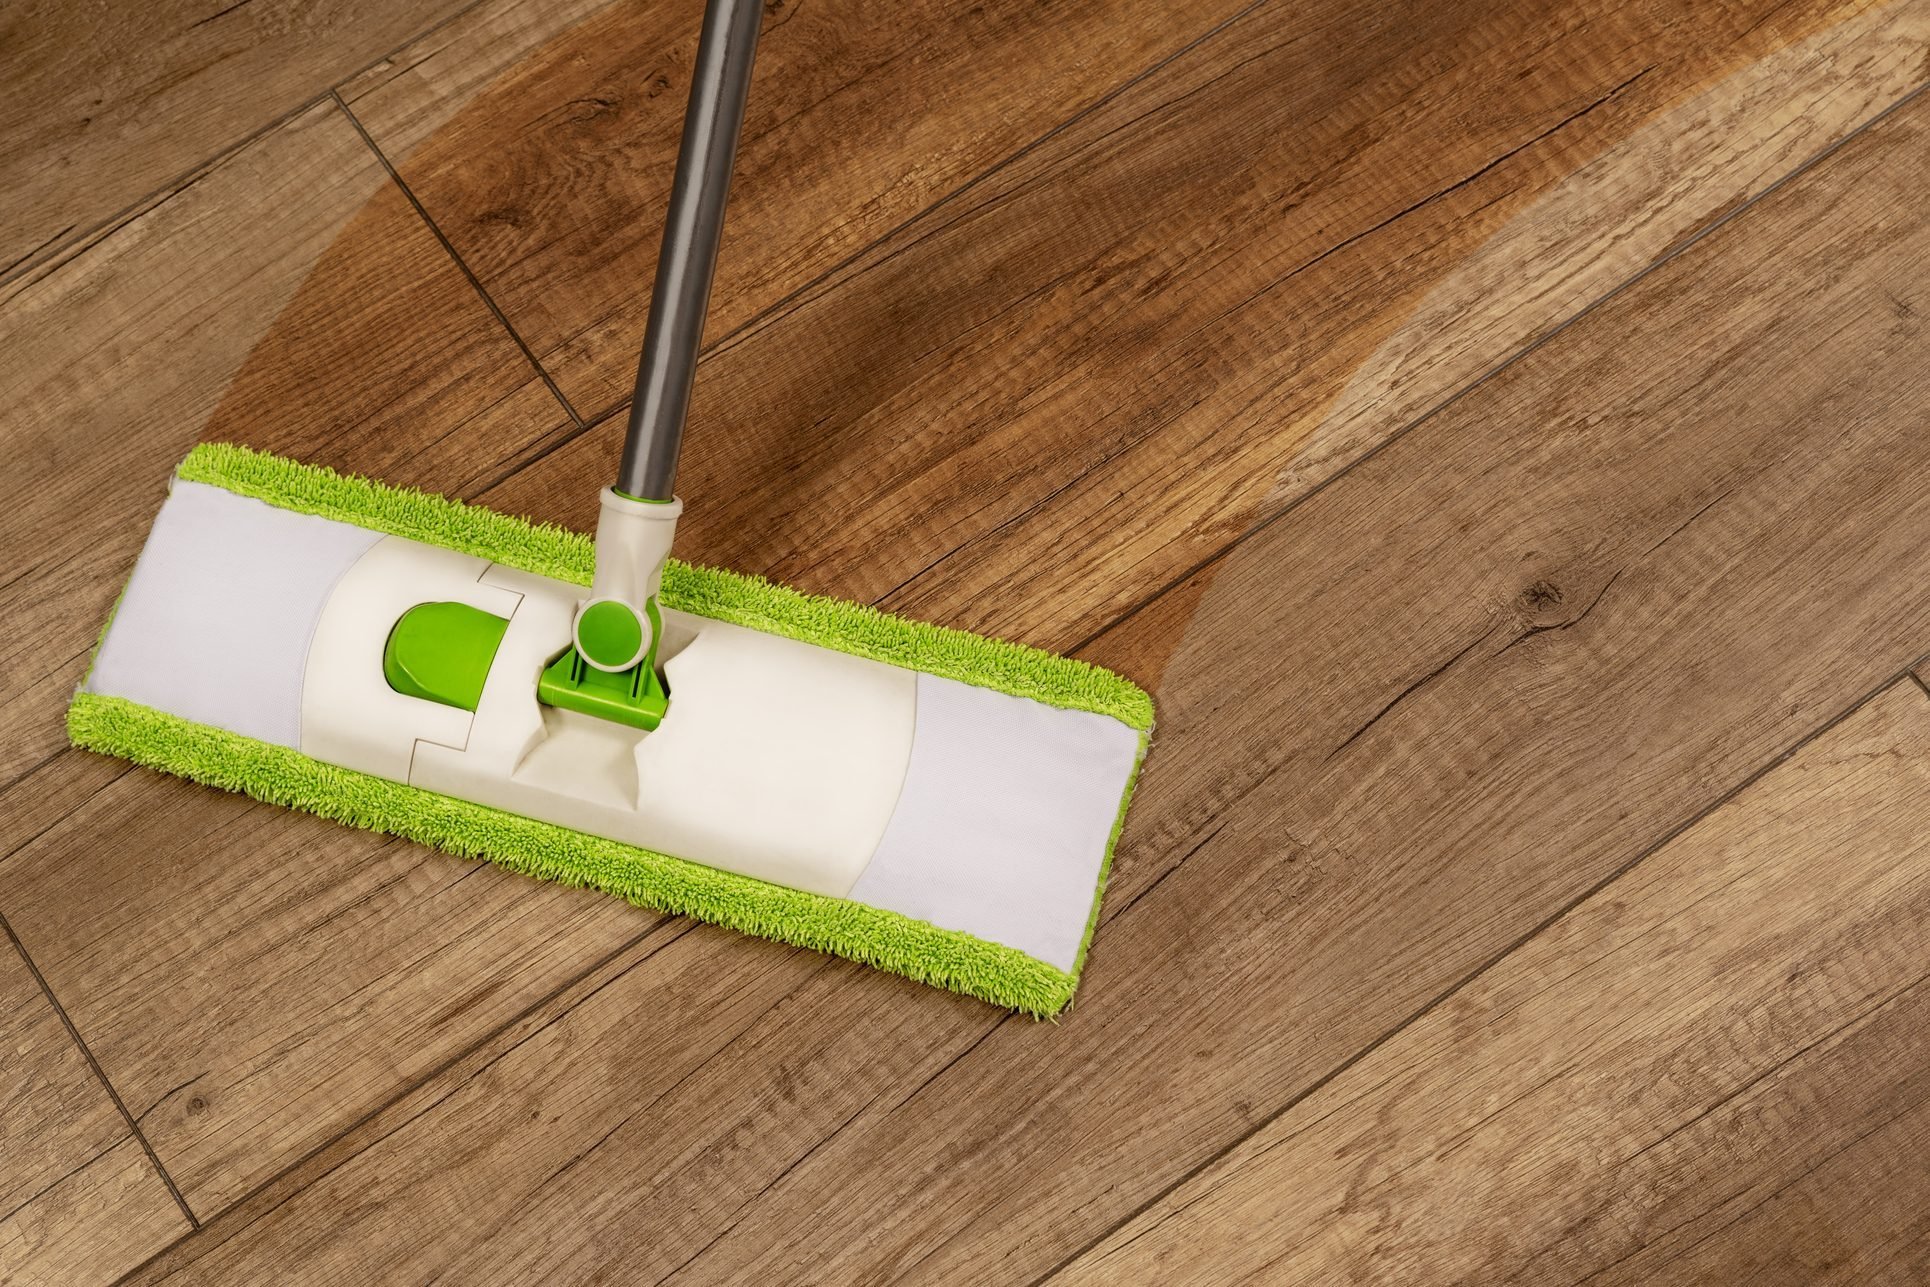 How to Clean and Protect Laminate Floors